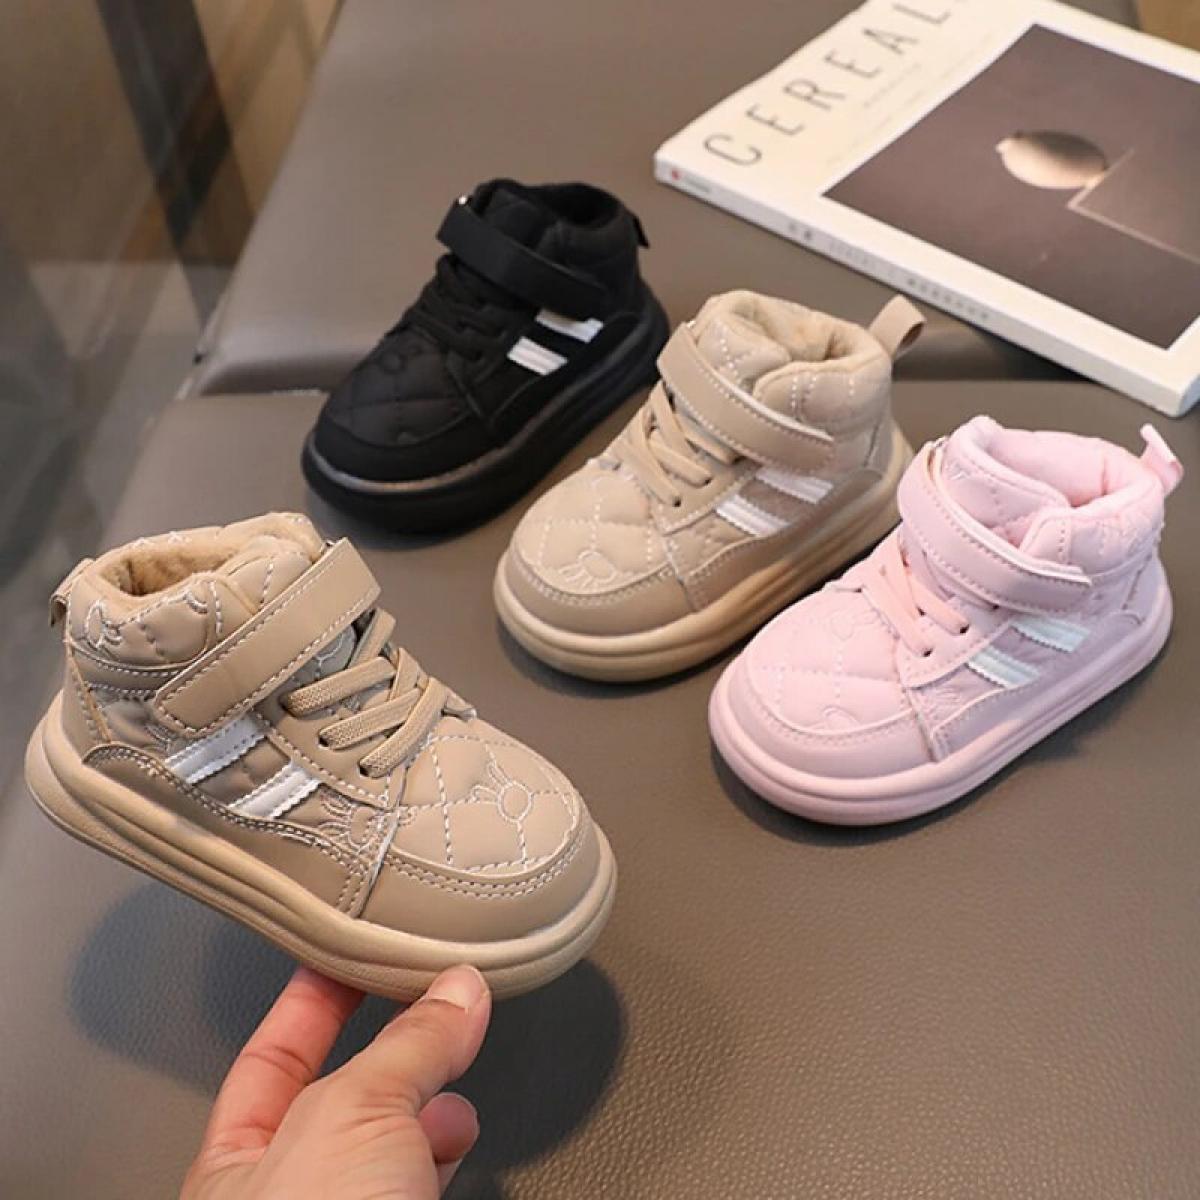 New Children's Casual Shoes For Boys Girls High Top Sports Sneakers Kids Plaid Pu Leather Snow Boots Baby Non Slip Casua